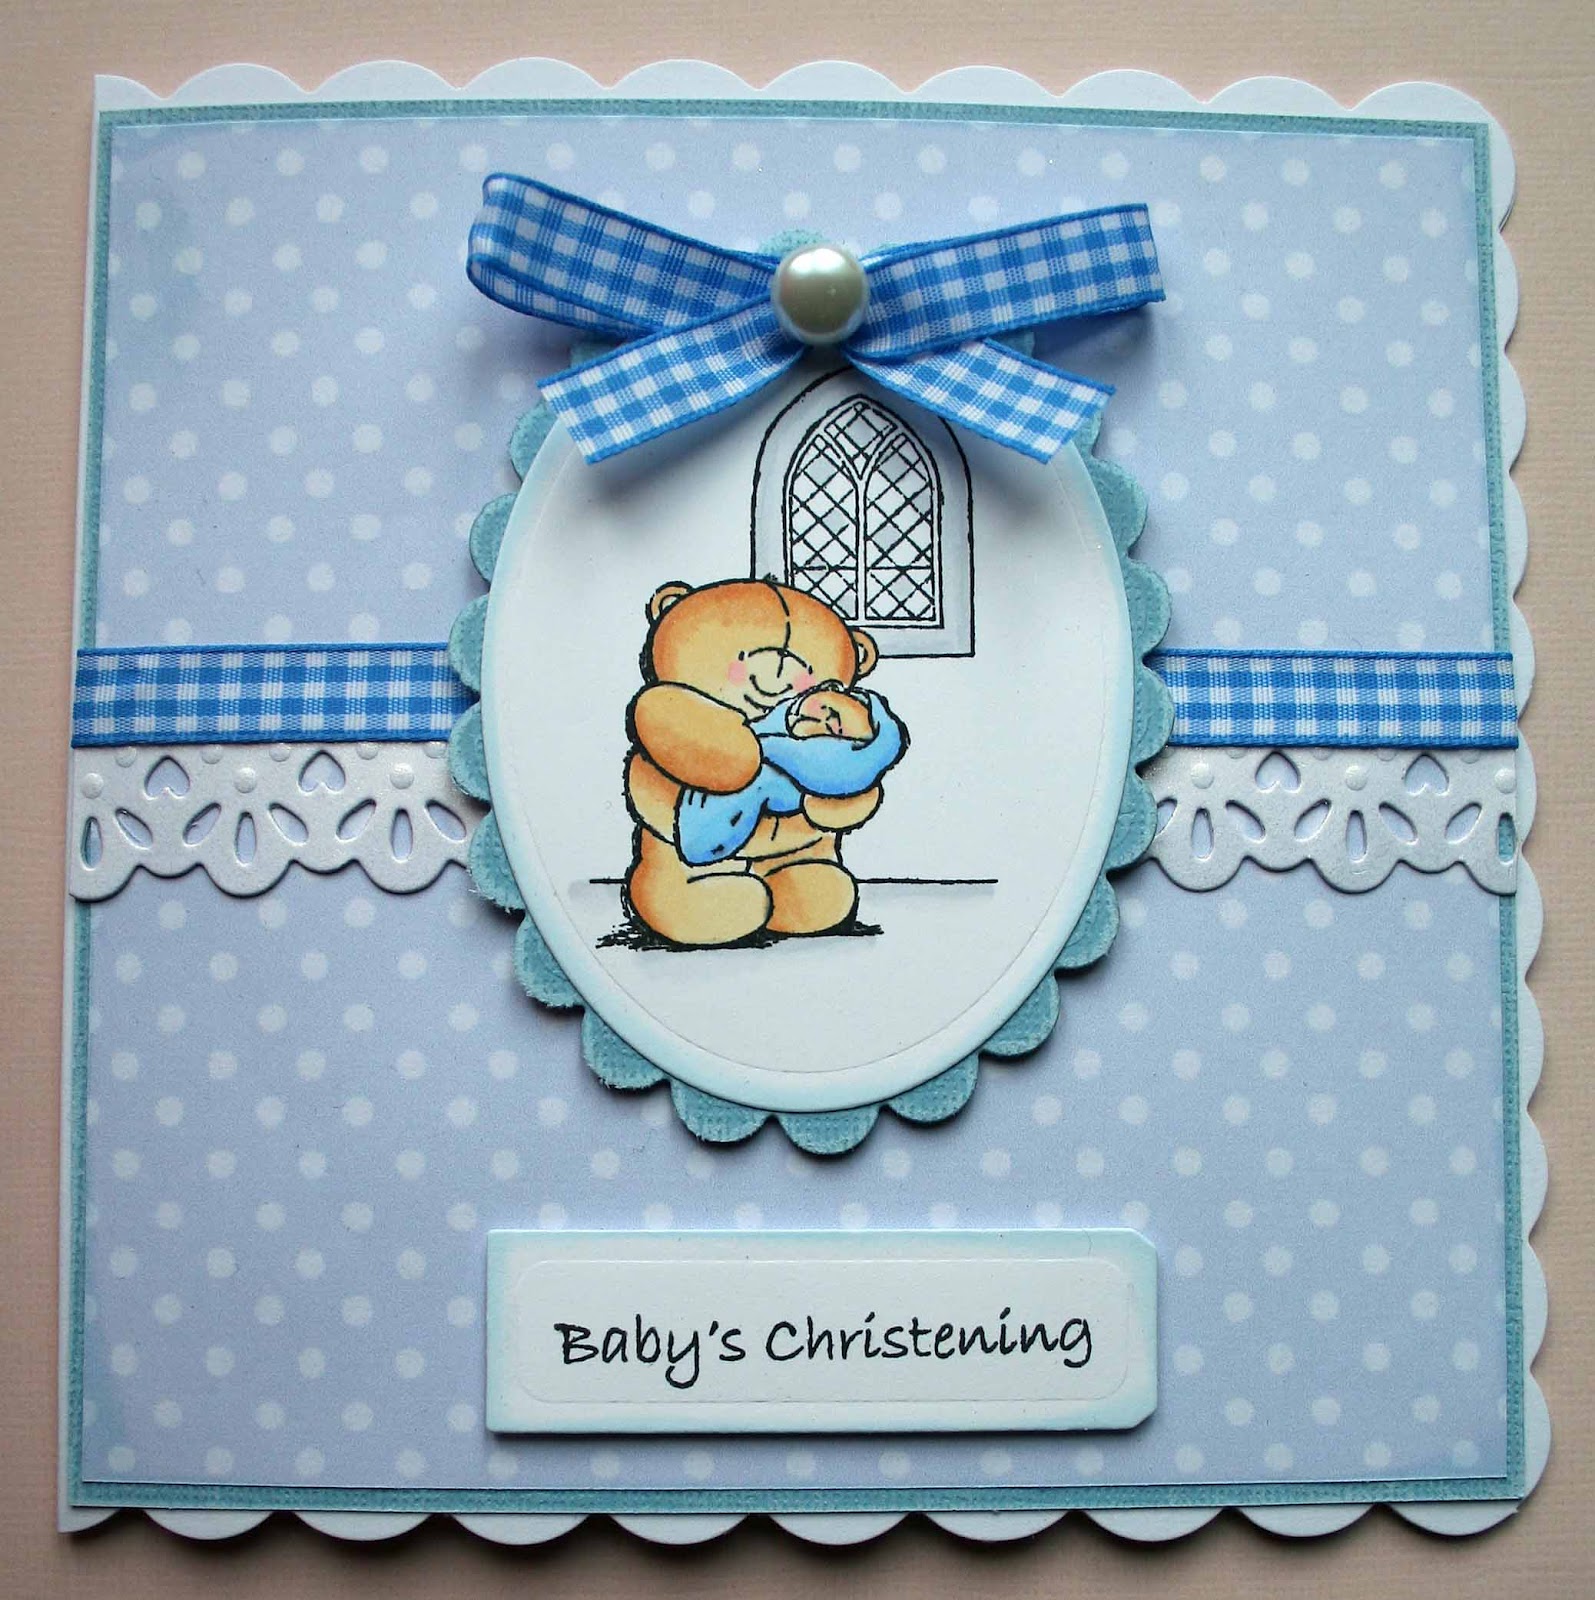 Do You Get A Card For A Christening